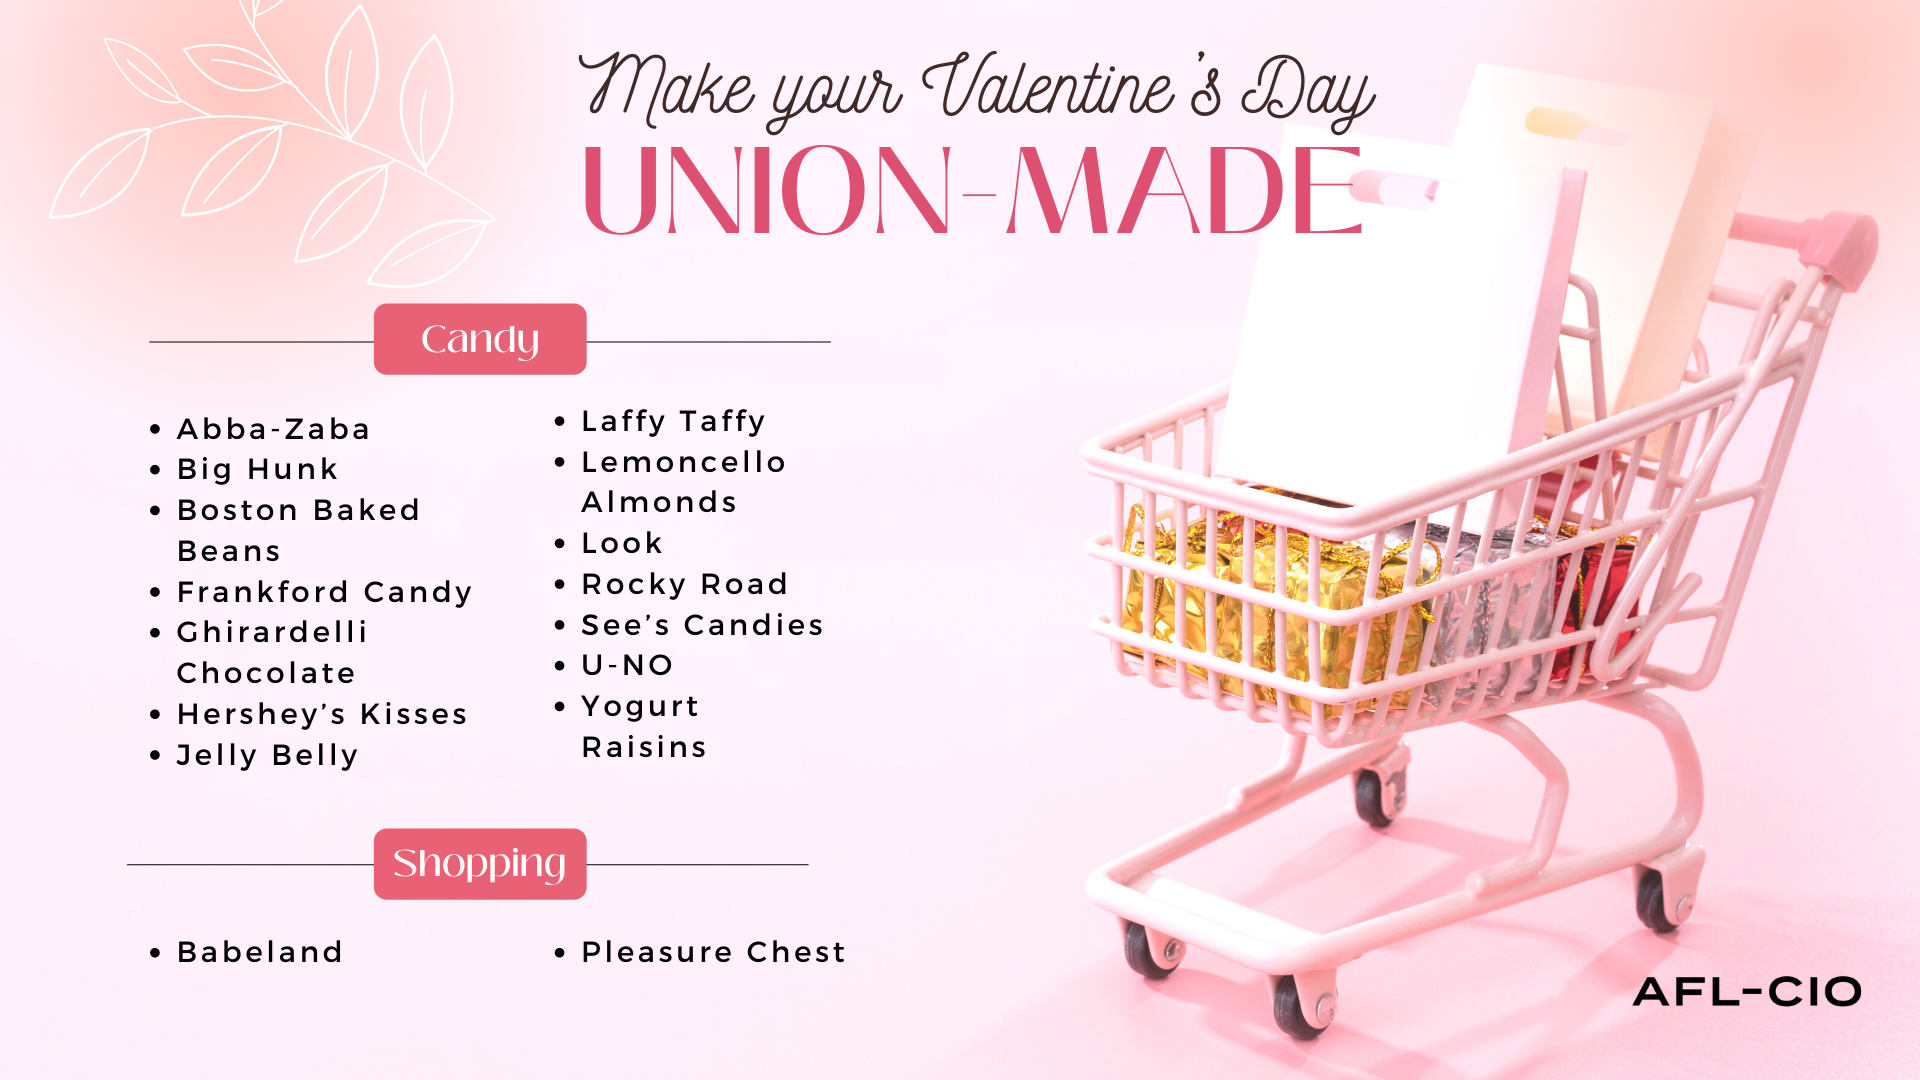 Make your Valentine's Day Union-Made